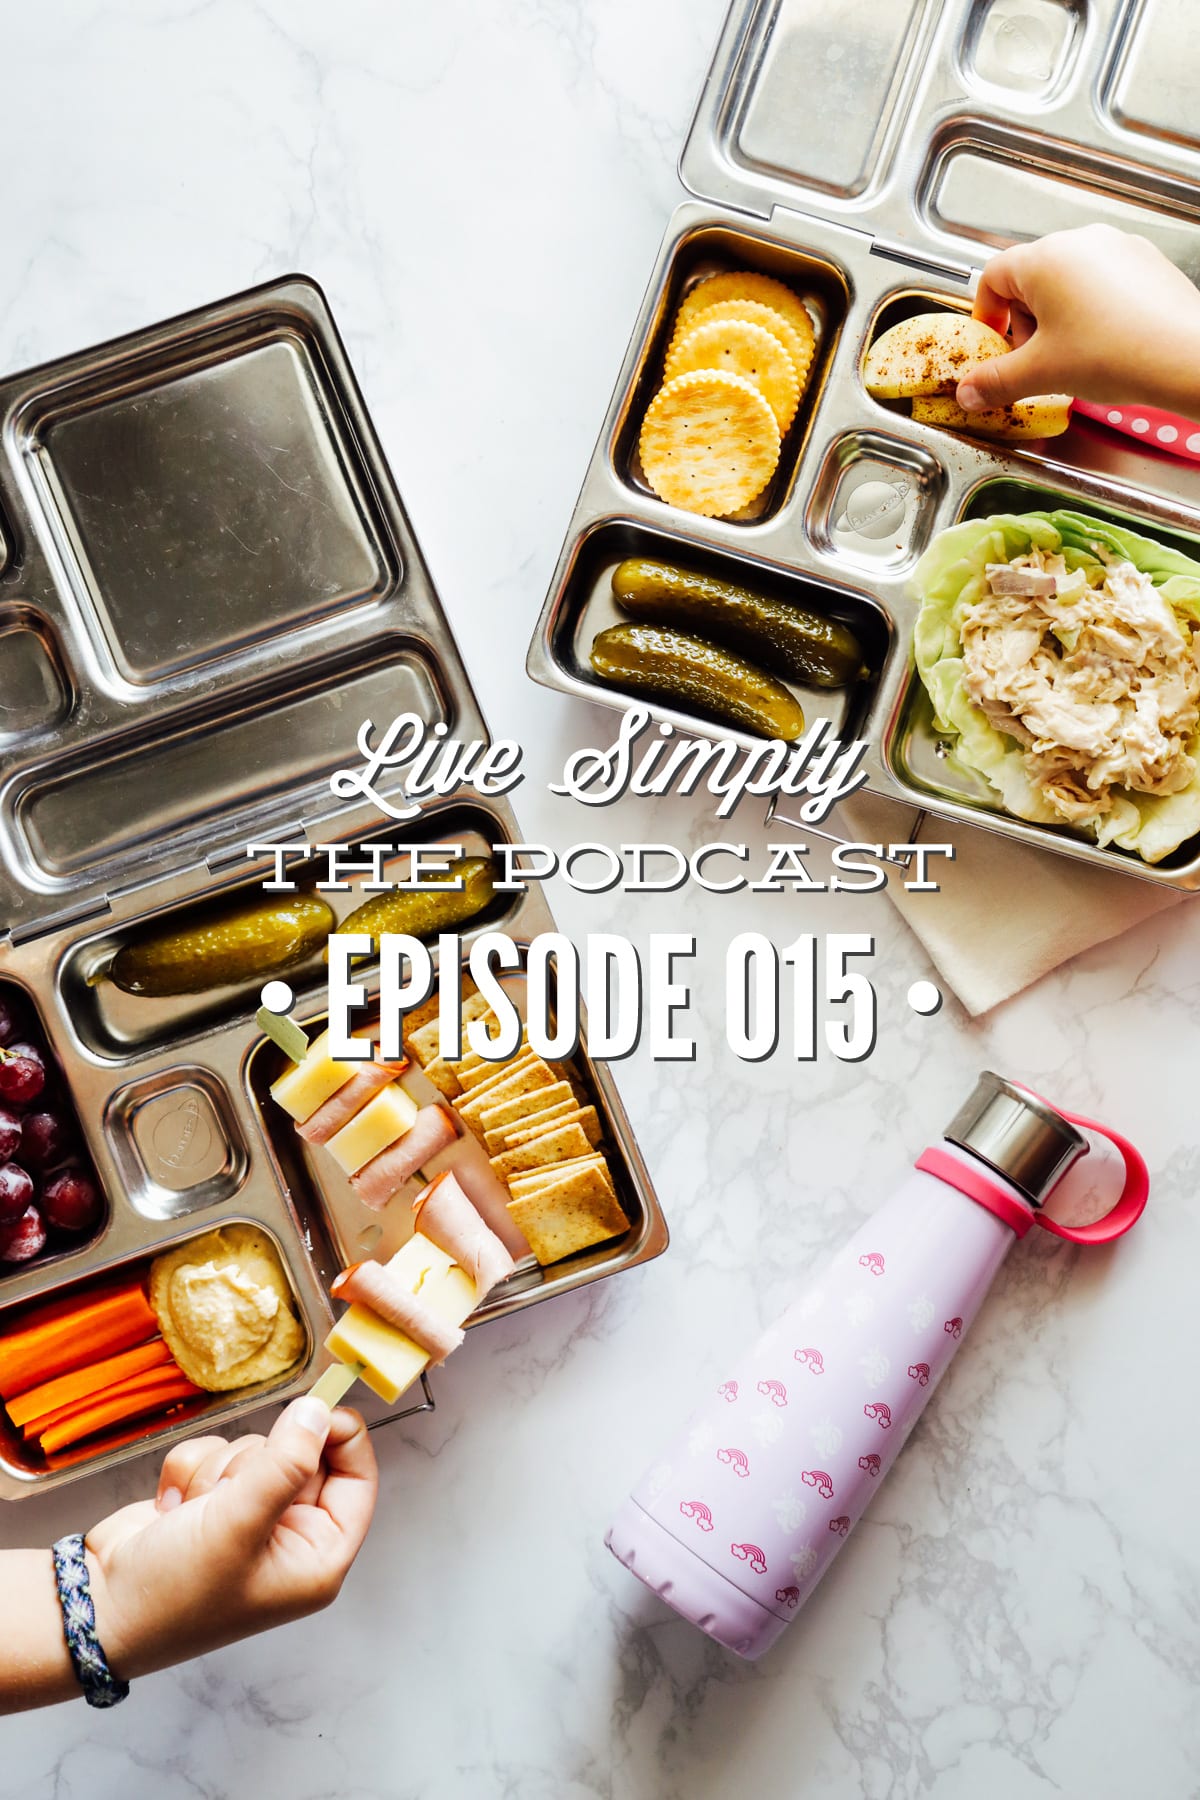 Podcast 015: Getting kids involved in the kitchen with Renee from Raising Generation Nourished